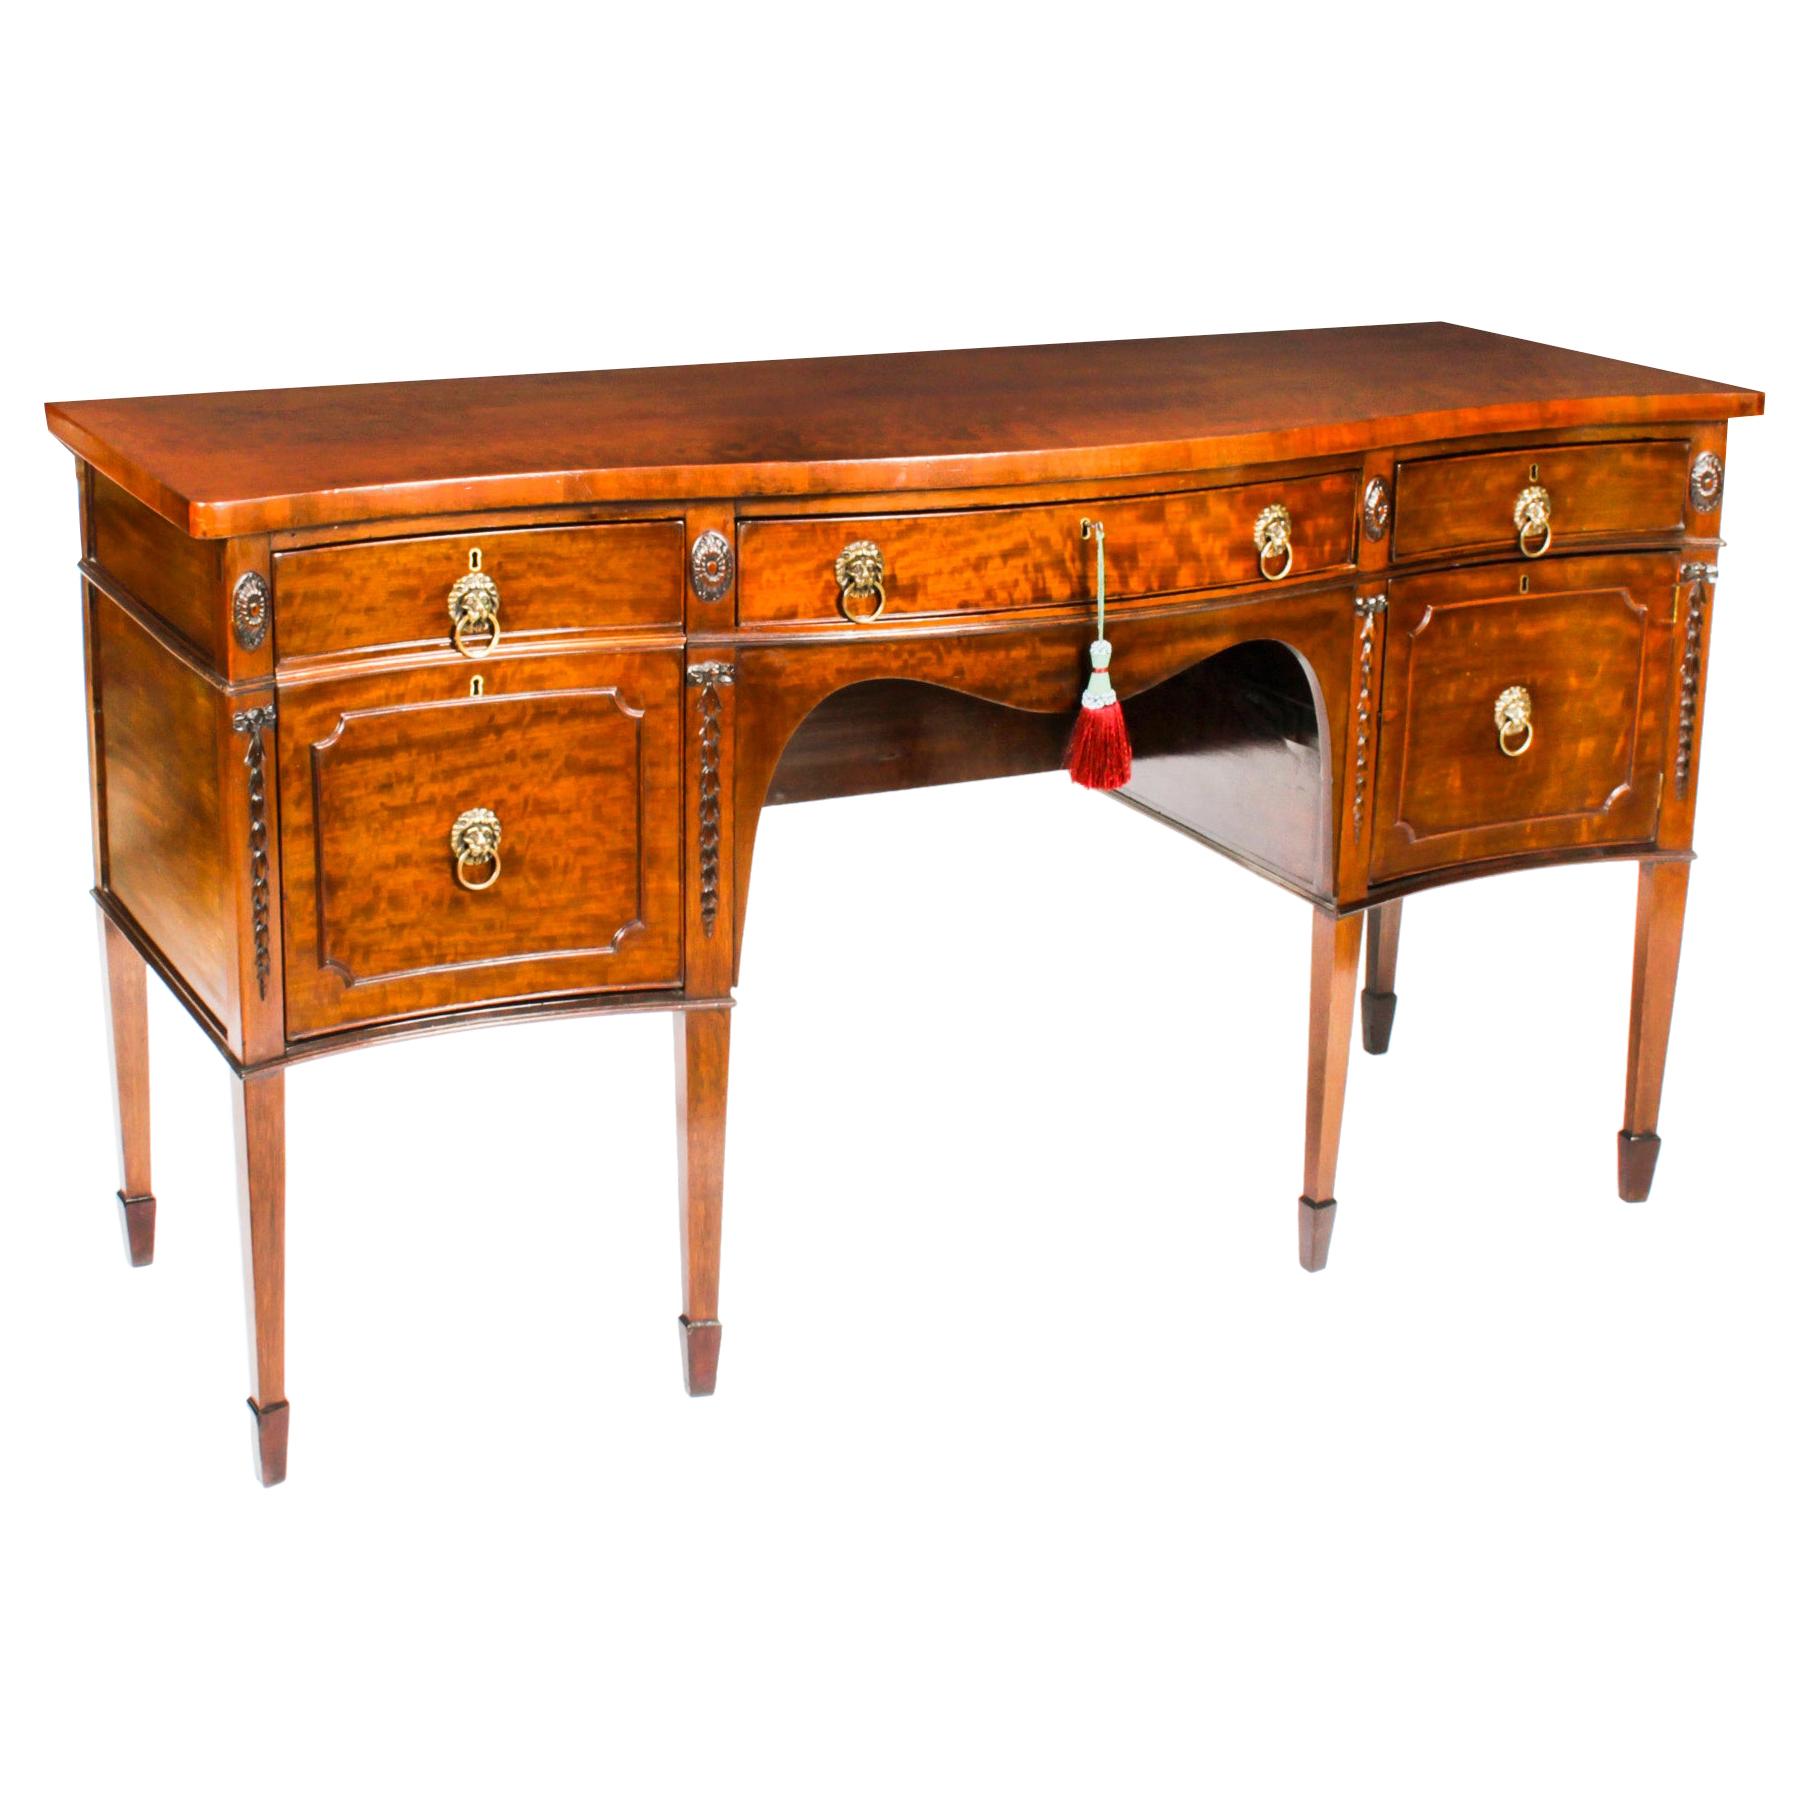 Antique George III Flame Mahogany Serpentine Sideboard, 19th Century For Sale